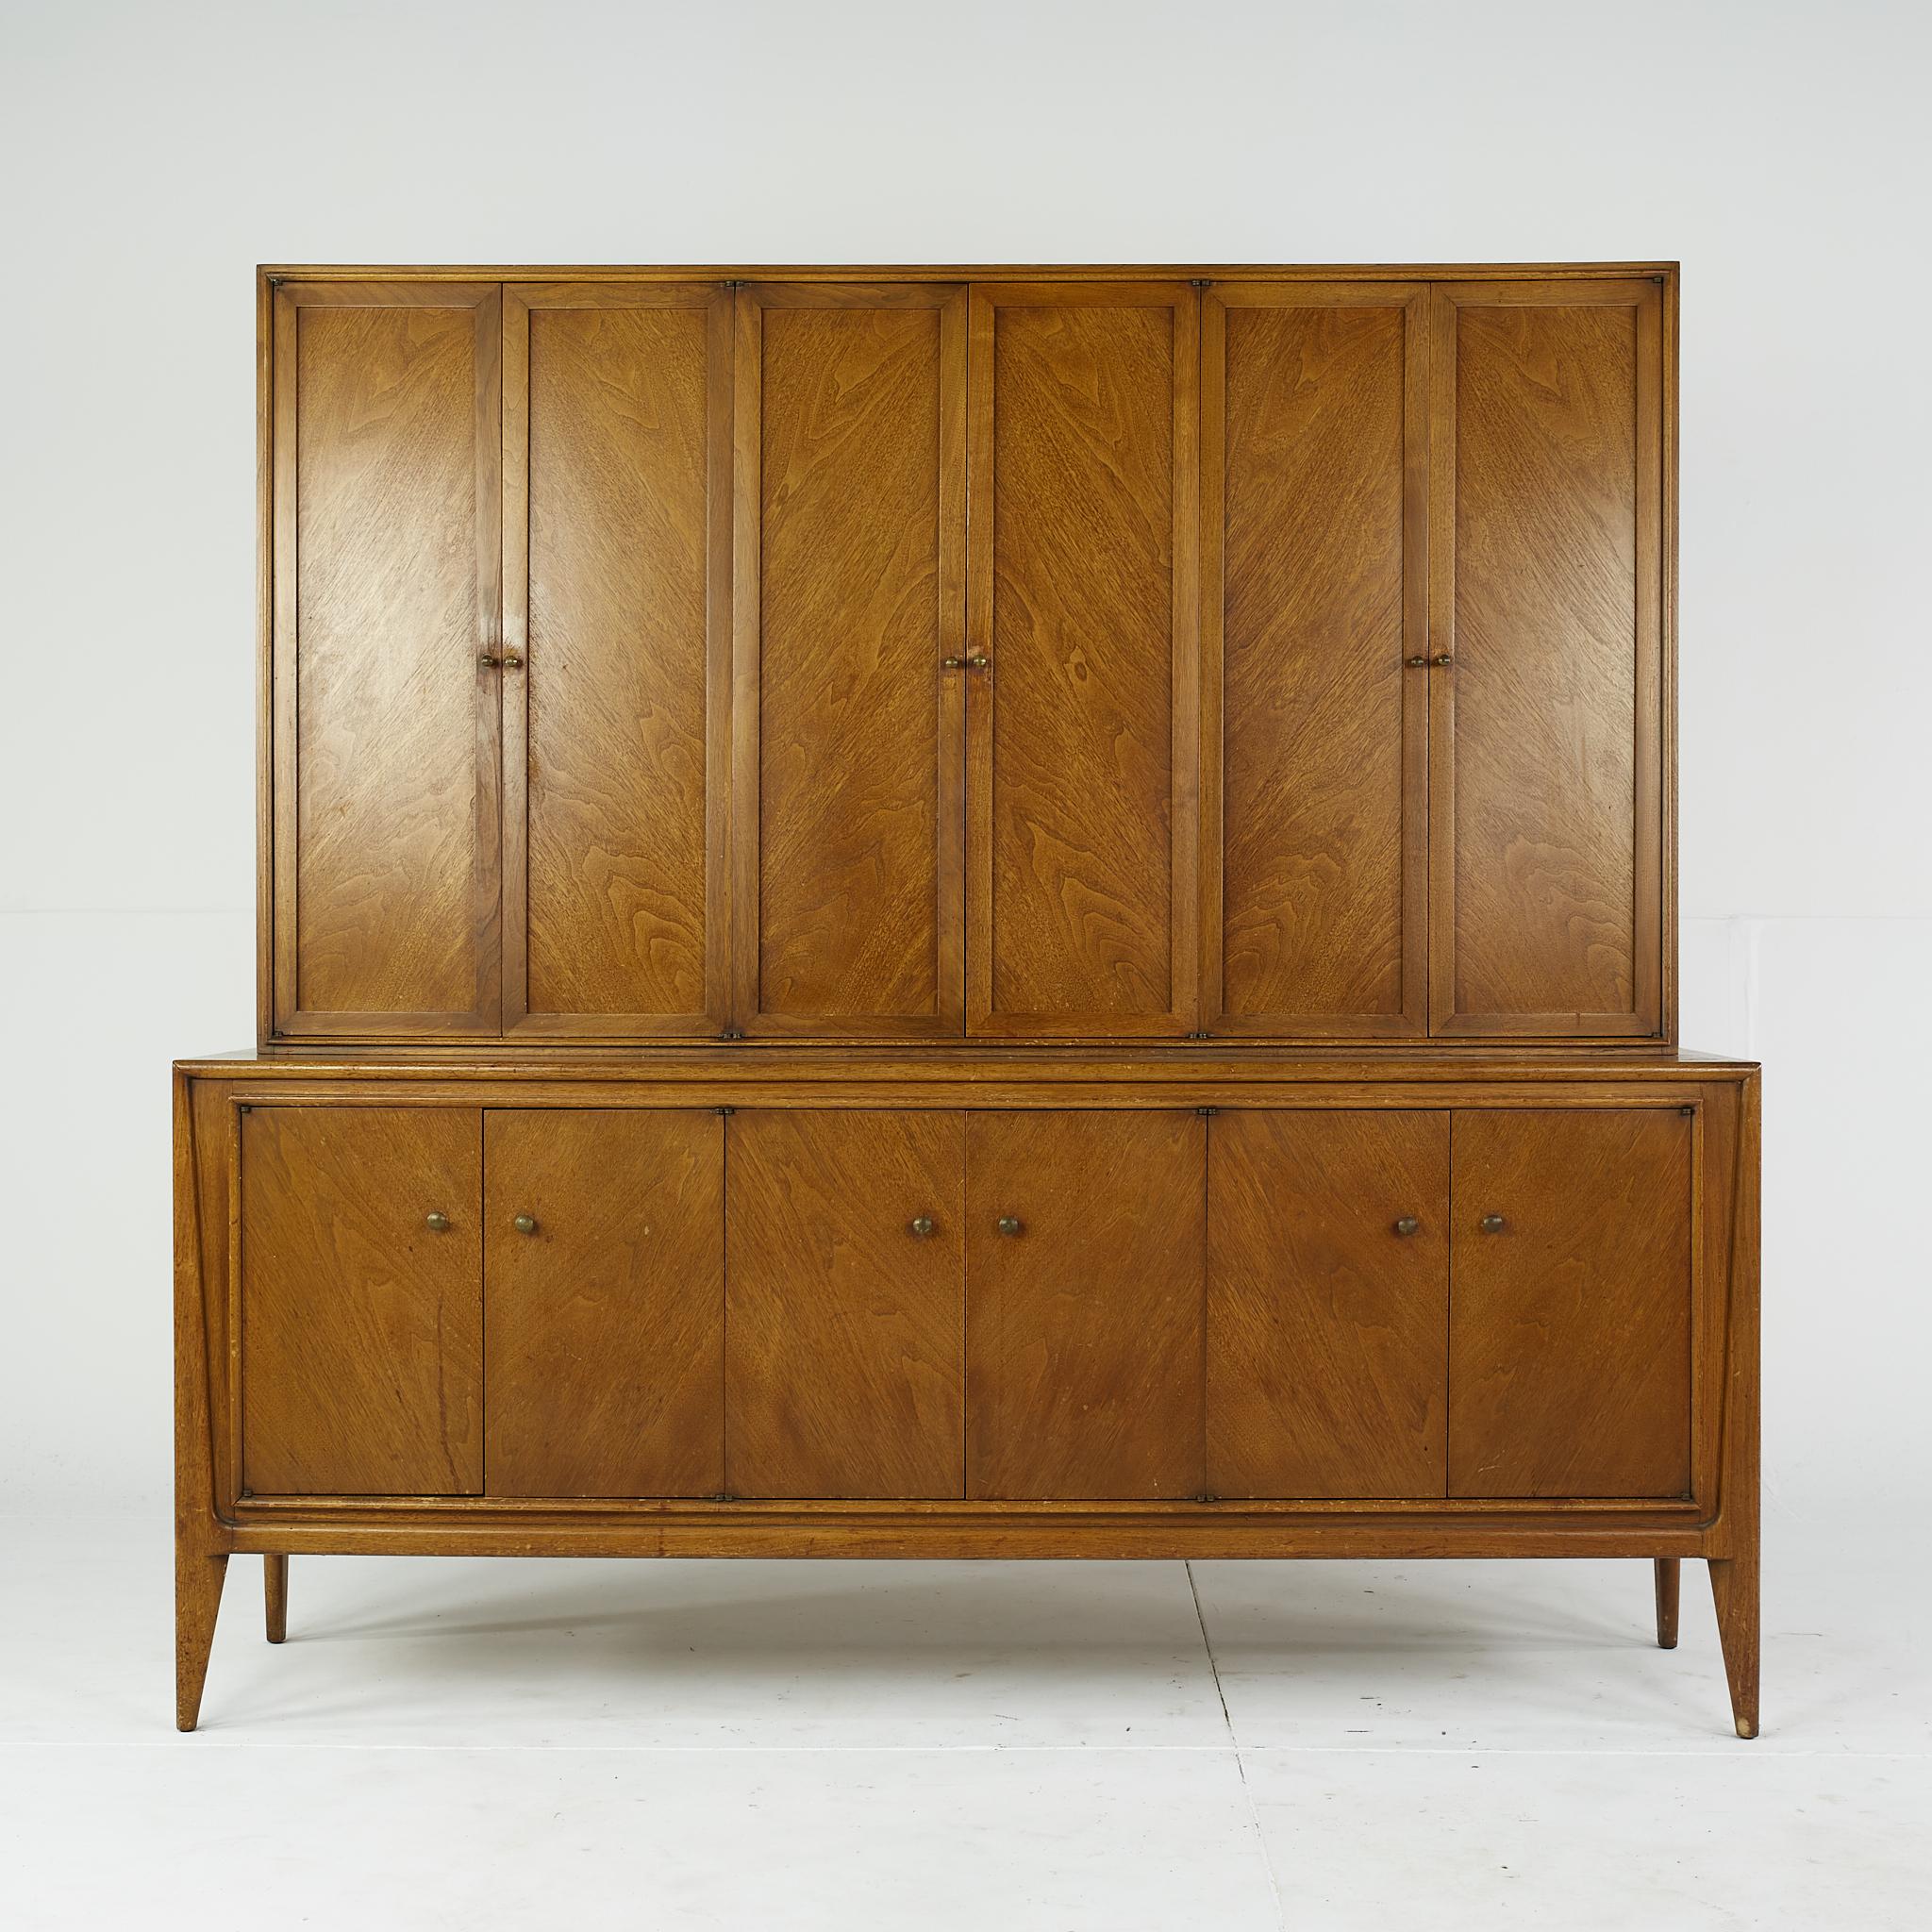 Mount Airy Facade Collection Mid Century Walnut Buffet and Hutch

This buffet measures: 72 wide x 19.5 deep x 69 inches high

All pieces of furniture can be had in what we call restored vintage condition. That means the piece is restored upon